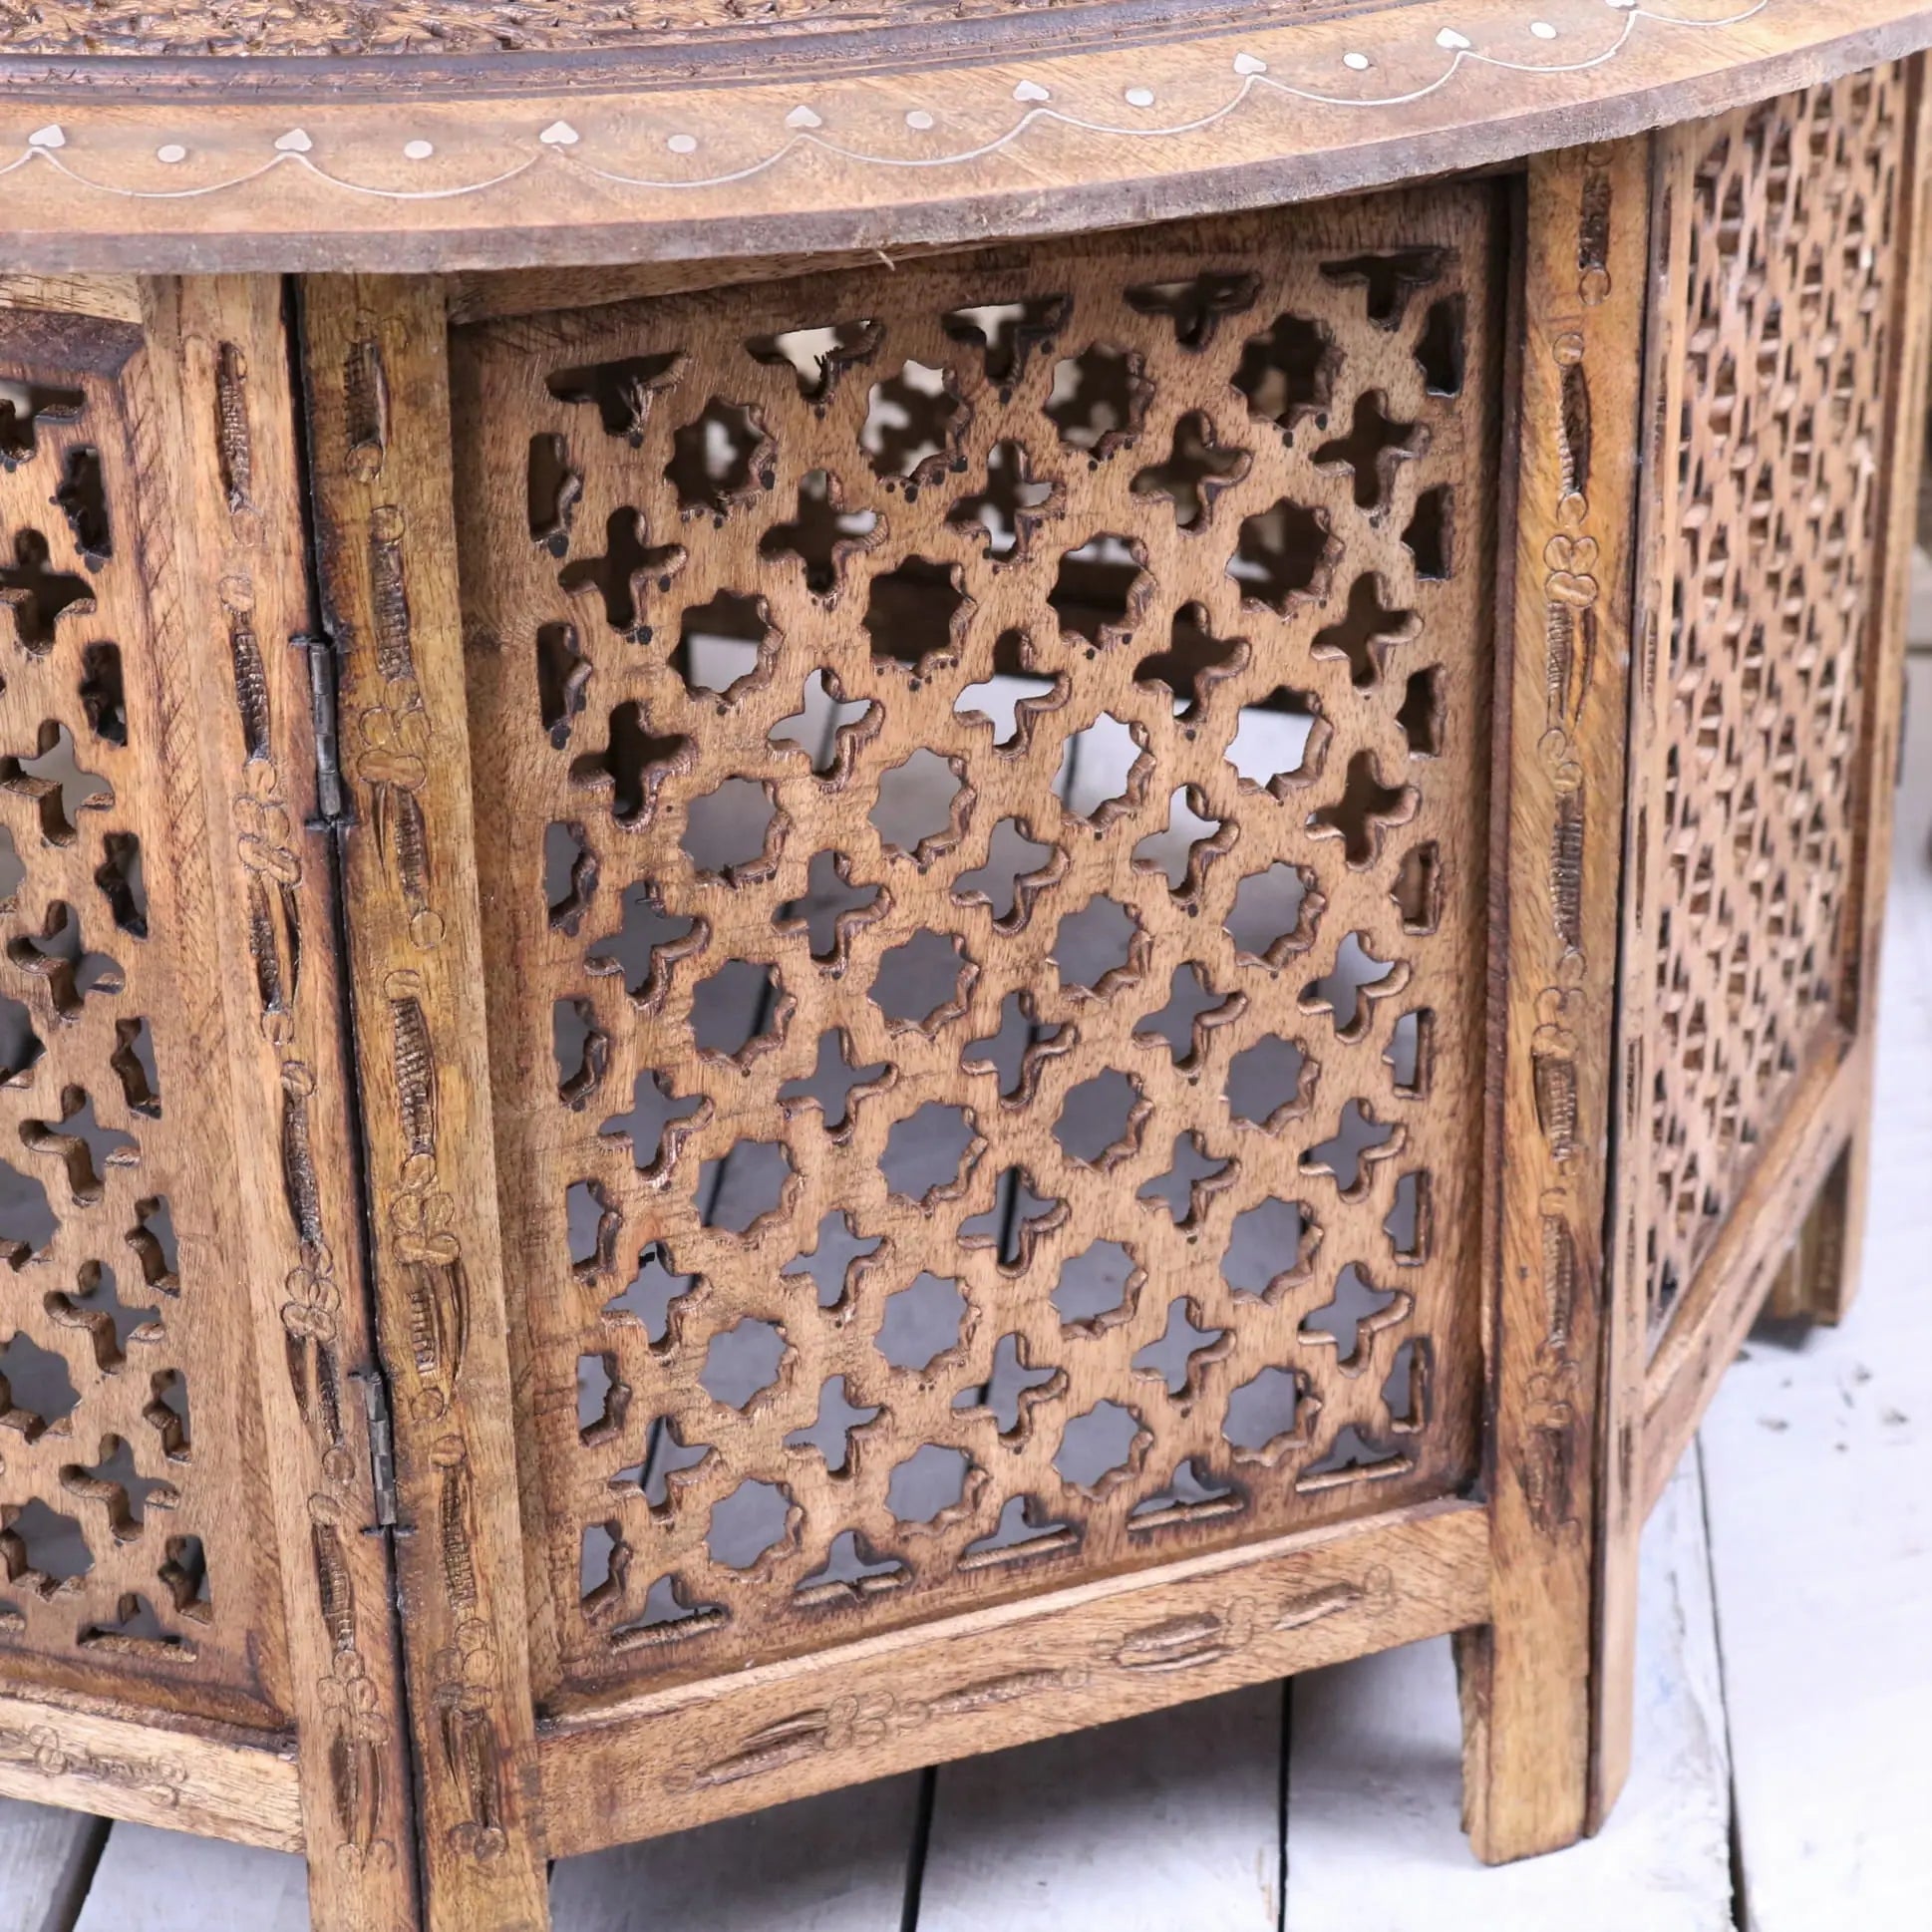 Matanga Round Wooden Coffee Table - Closeup of Base Carving Moroccan Pattern